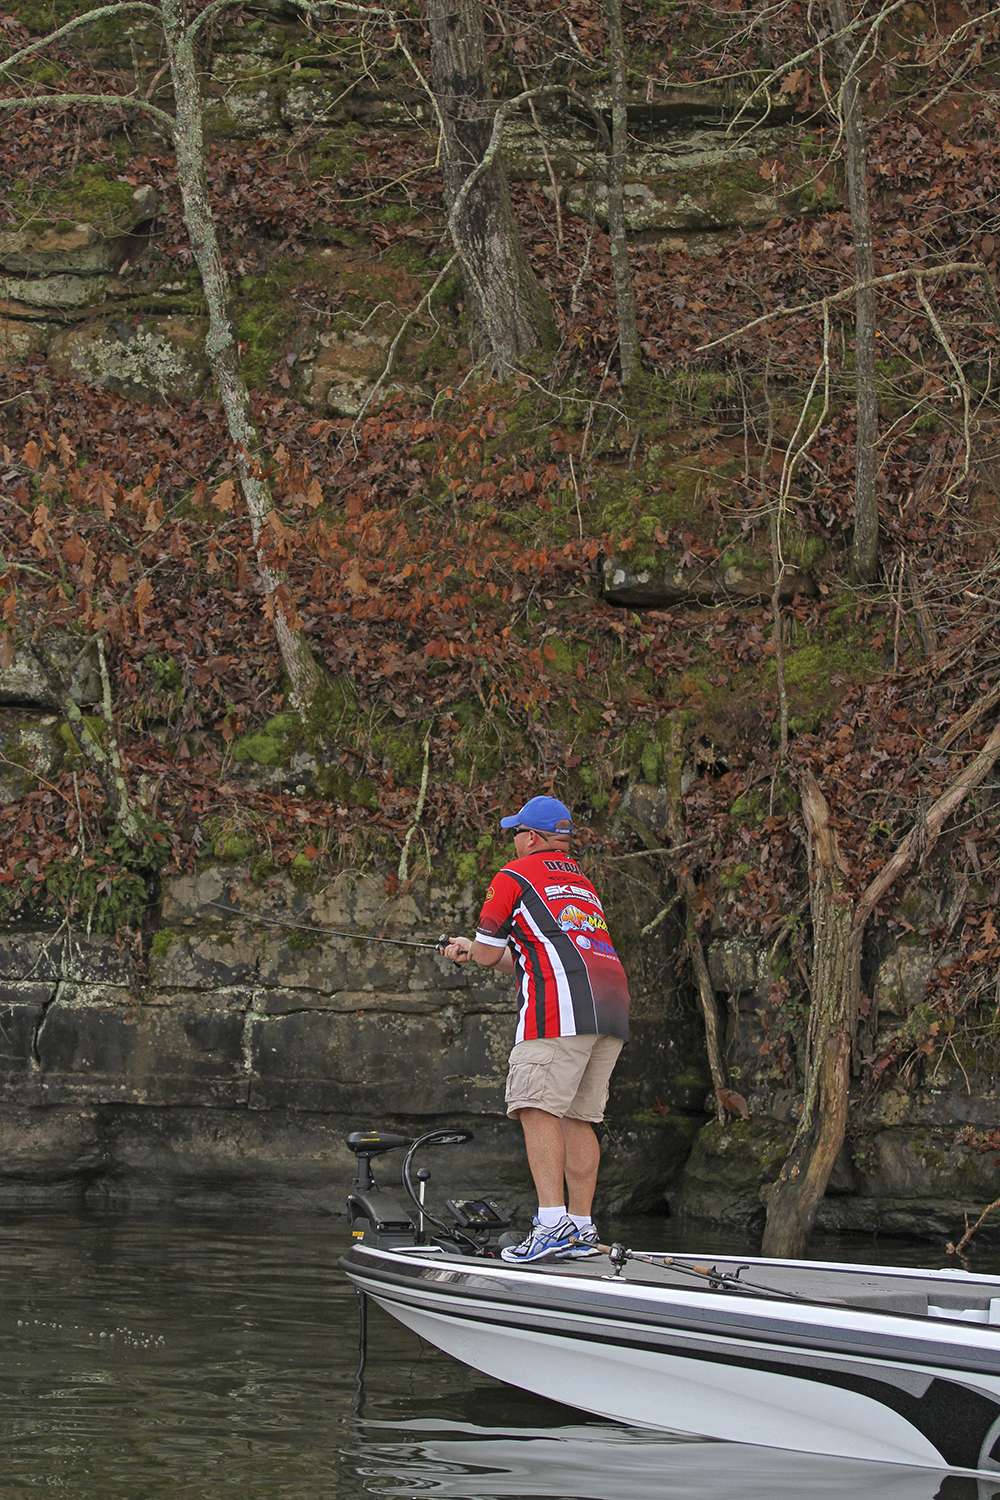 Deaver fished the rock wall in Town Creek as the time for session one was winding down.